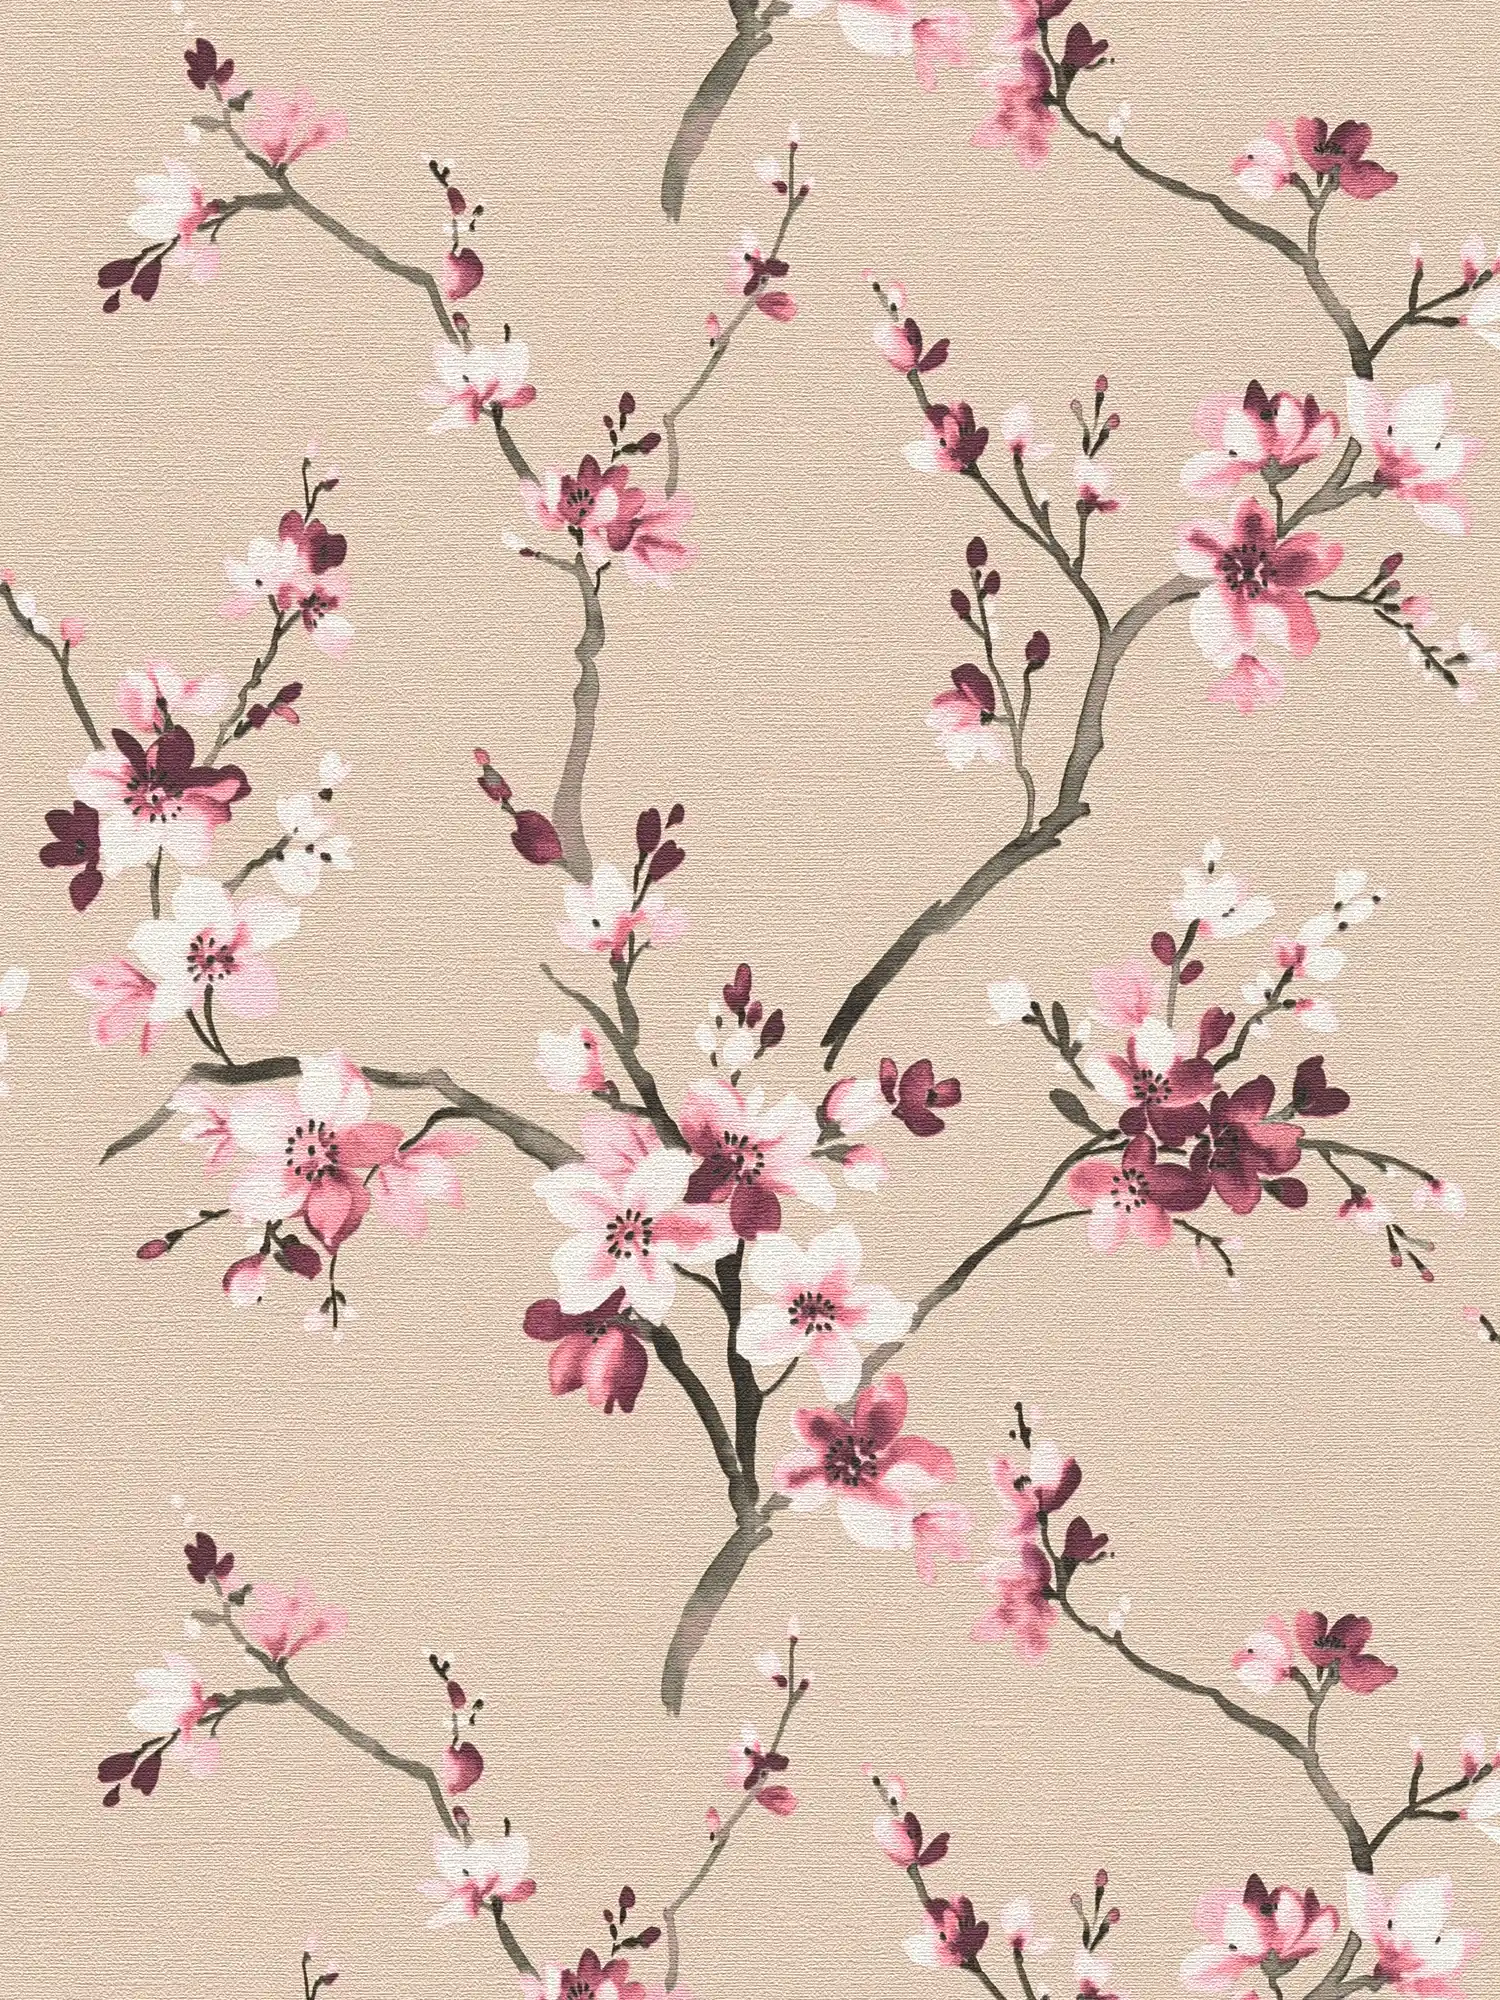 Pink floral wallpaper with watercolour flowers & branches
